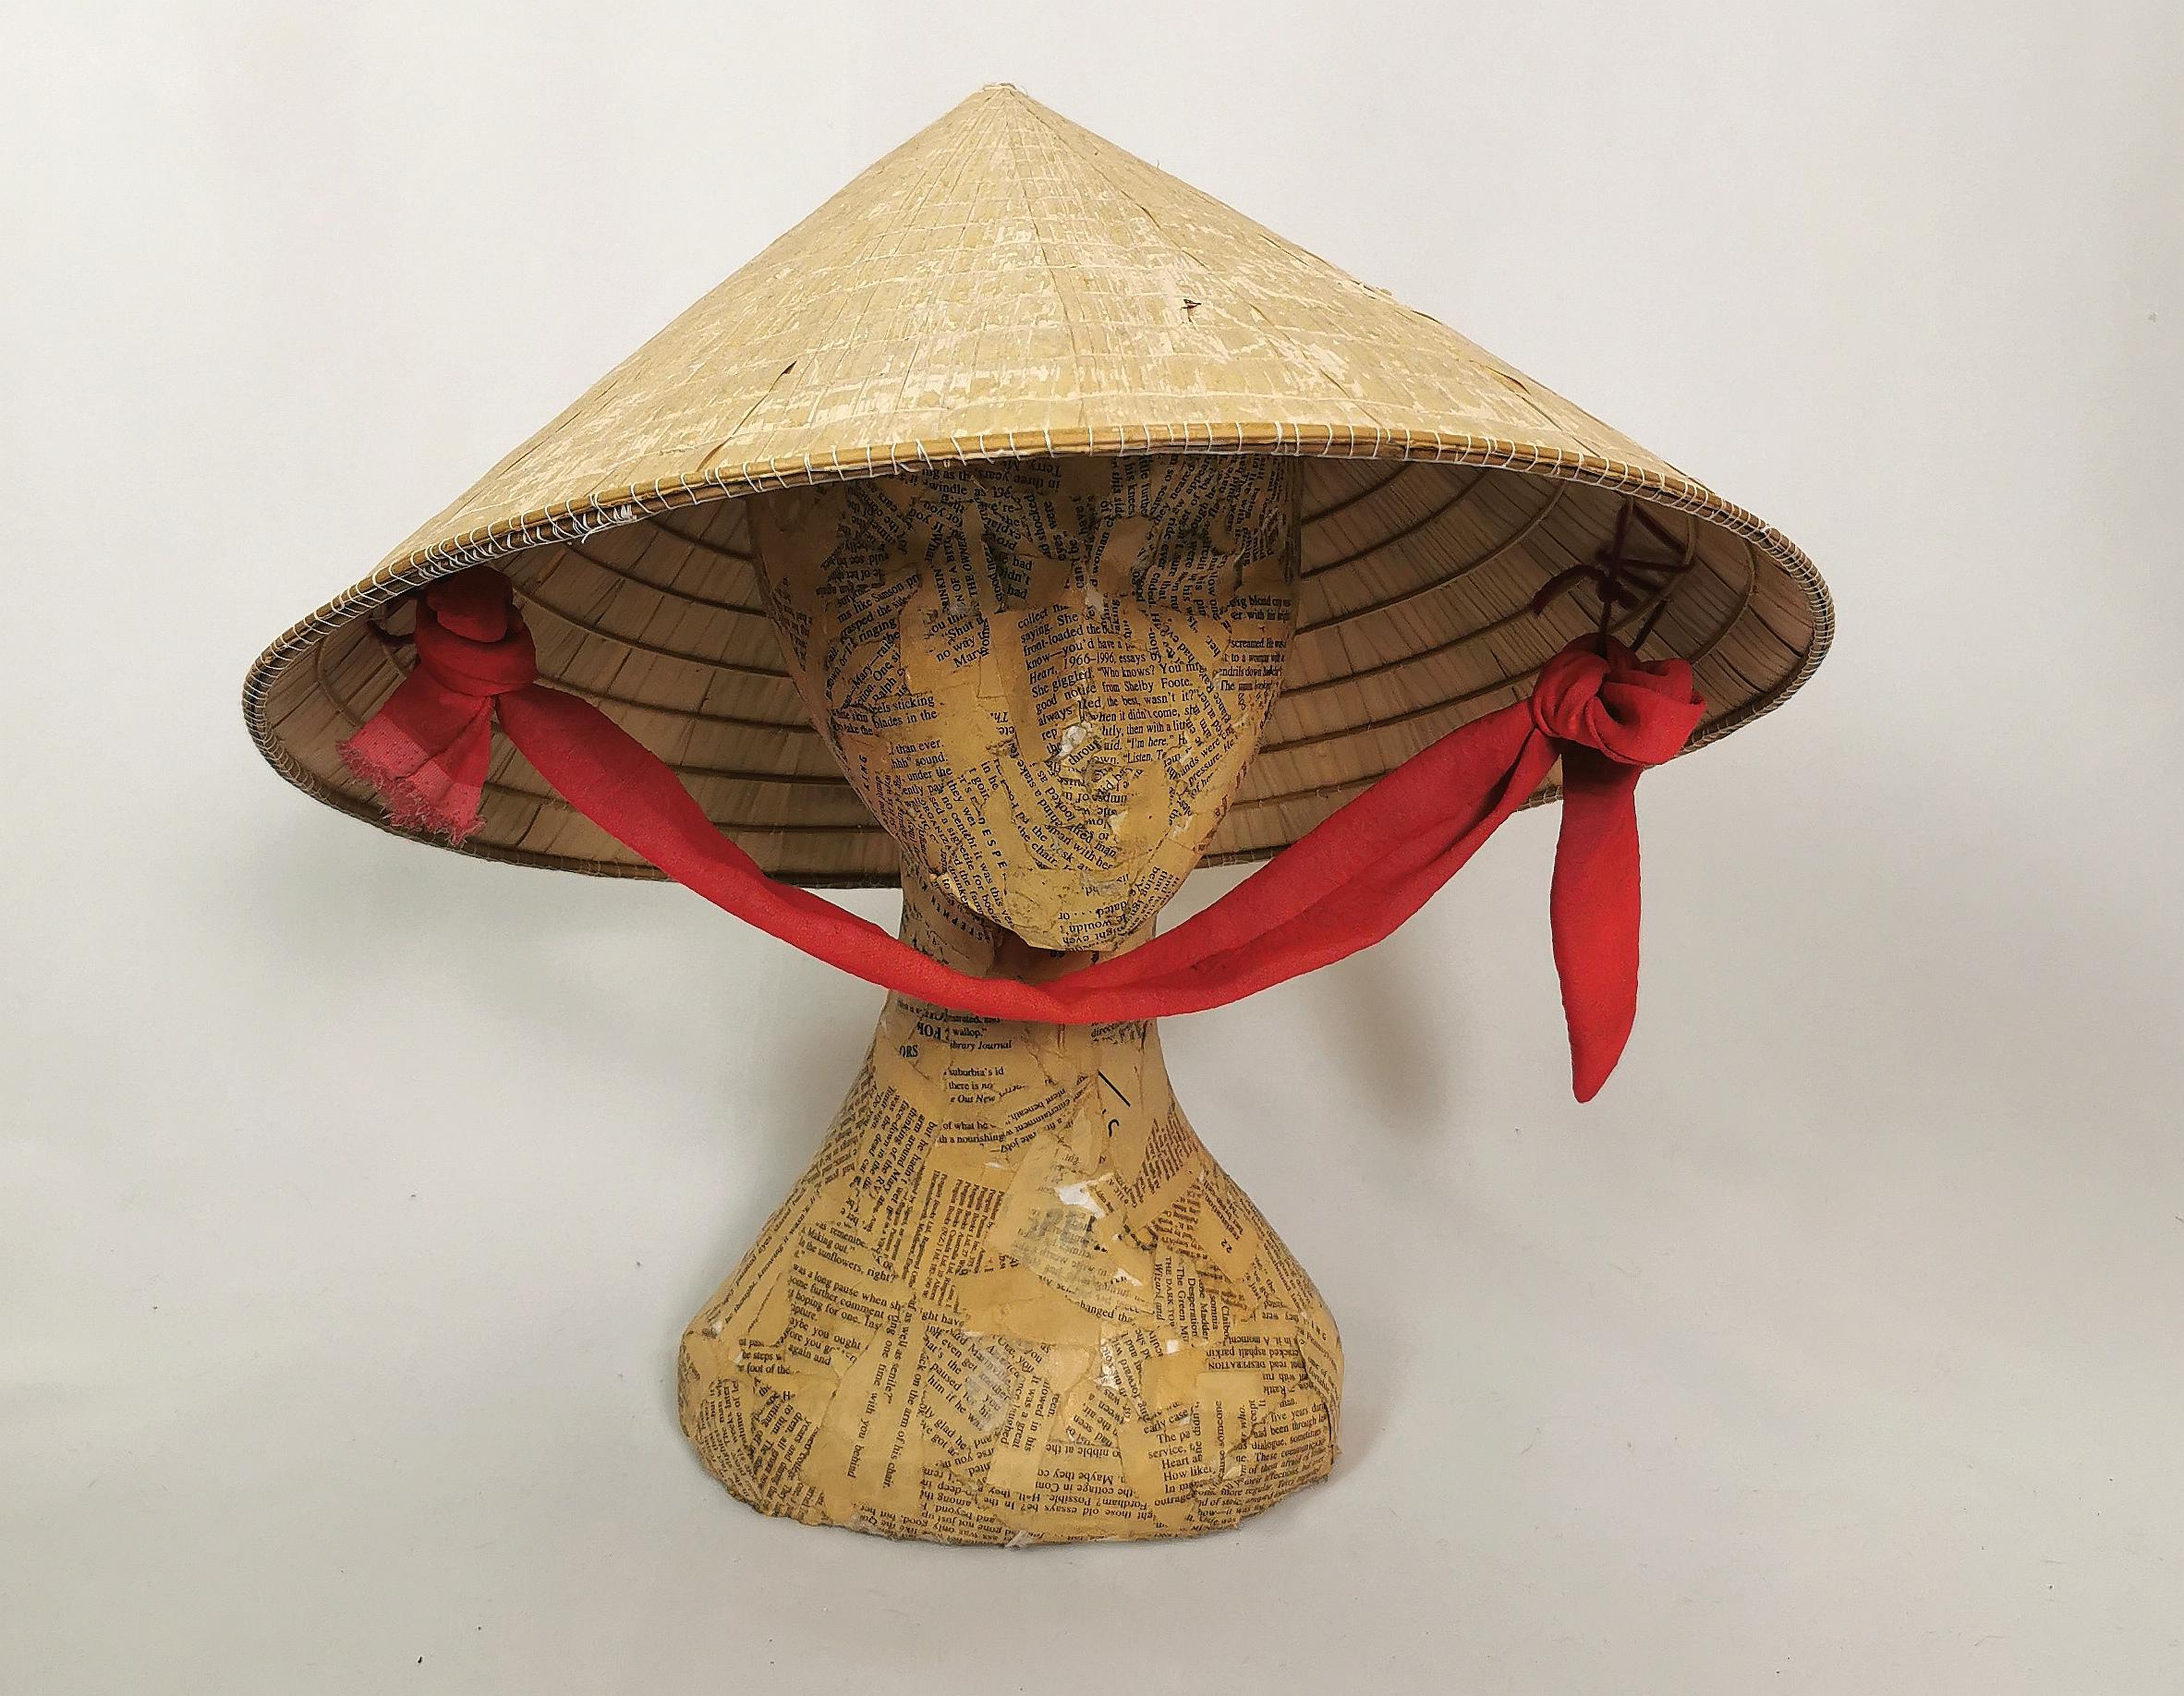 A fantastic vintage original Oriental or Asian sedge hat.

Also known as a coolie hat, these traditional conical straw hats were and are traditionally used for farming or outdoor jobs to protect from the sun and keep your head cool.

The hat is made